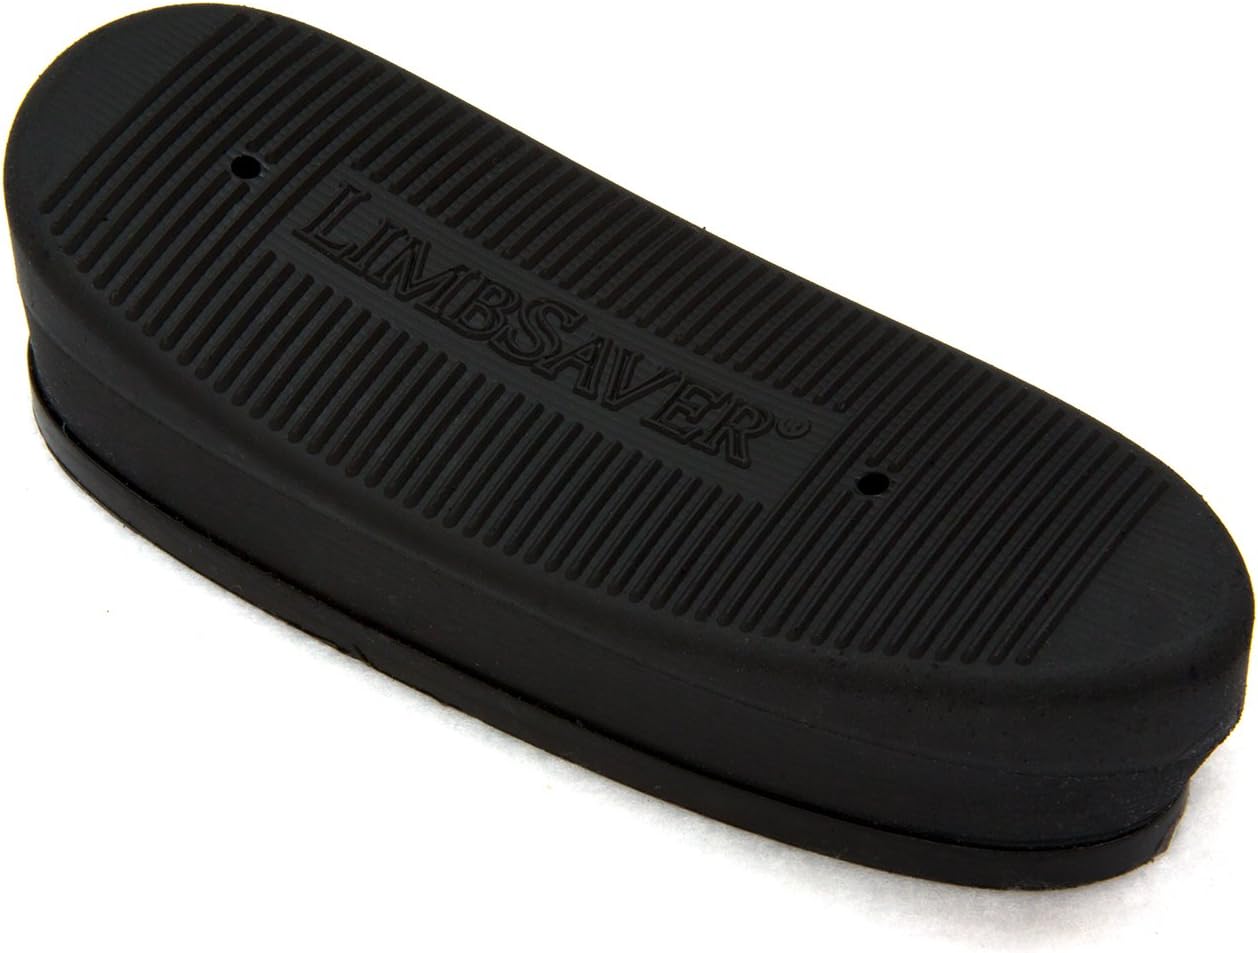 LIMBSAVER RECOIL PAD LARGE 10543 (AS615)